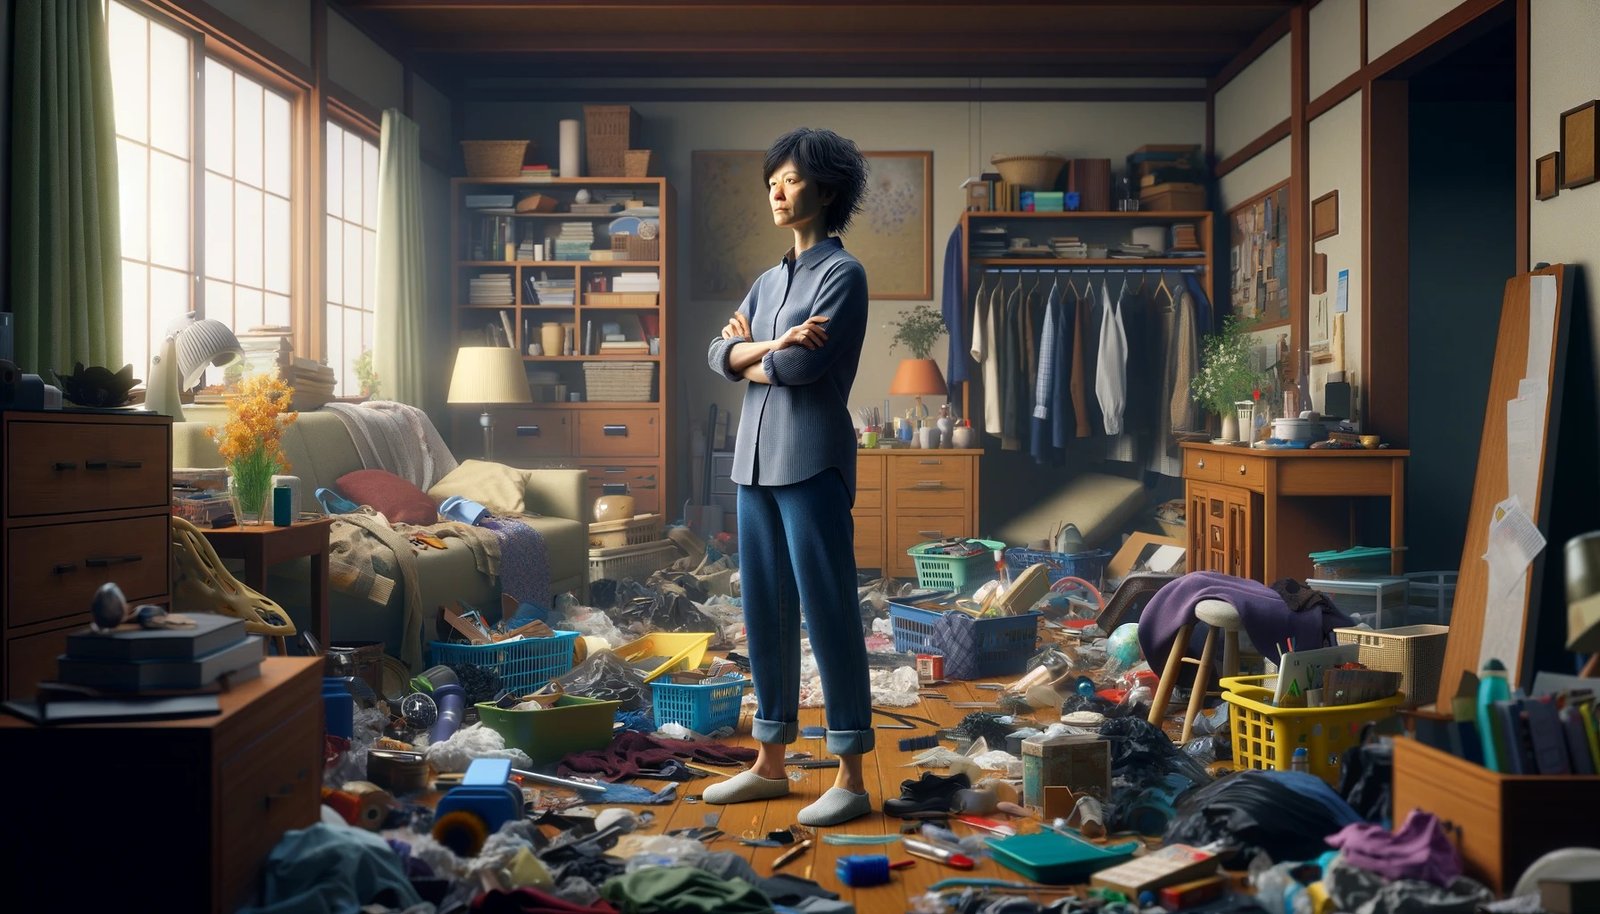 A woman standing in the middle of a room surrounded by mess and clutter.